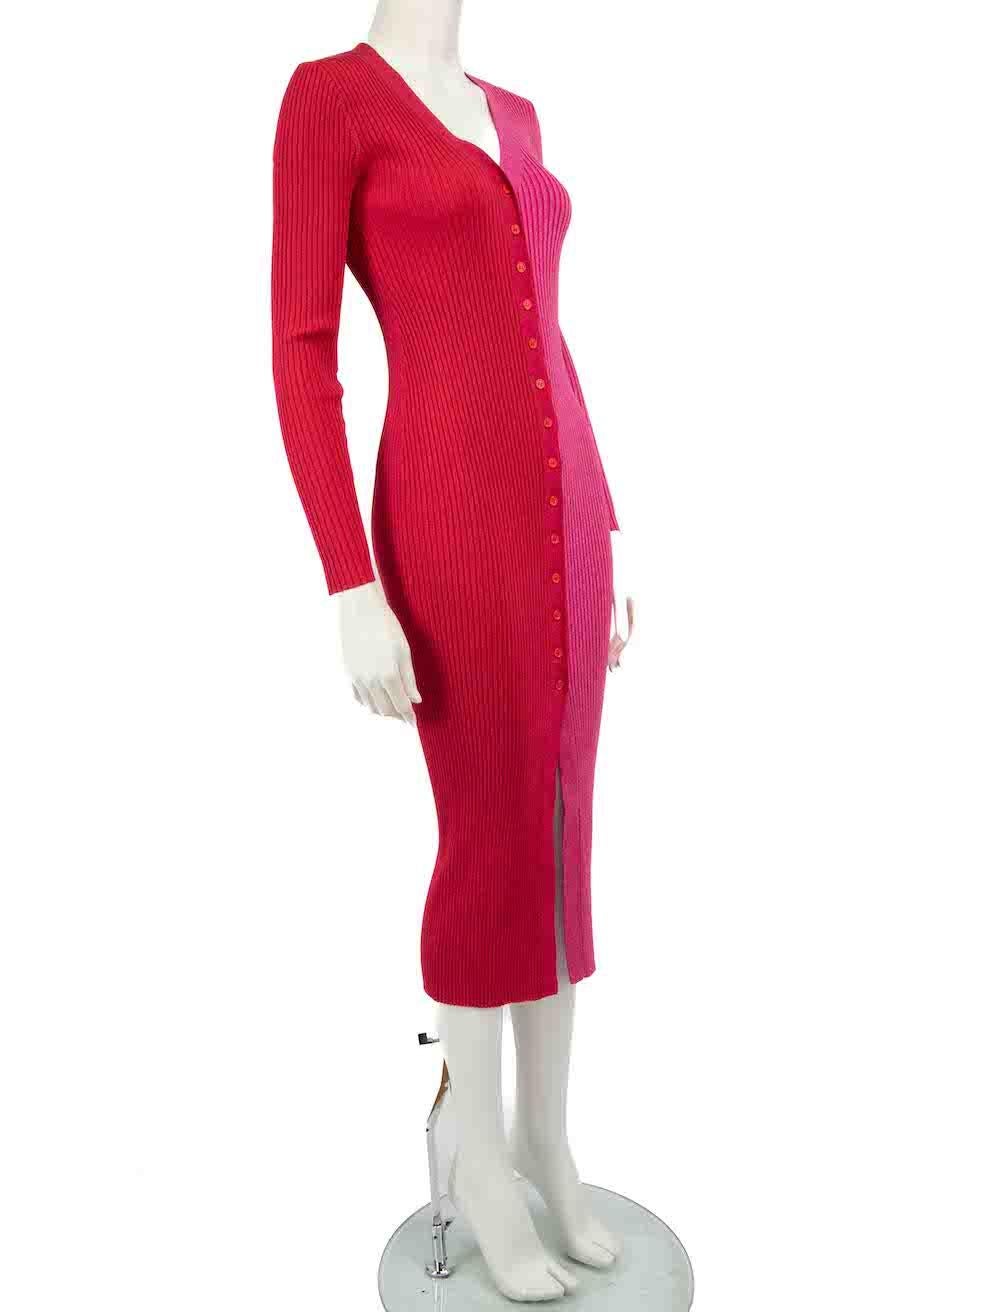 CONDITION is Very good. Hardly any visible wear to dress is evident on this used STAUD designer resale item.
 
 
 
 Details
 
 
 Red & pink
 
 Viscose
 
 Dress
 
 Knitted
 
 Metallic thread
 
 Long sleeves
 
 V-neck
 
 Stretchy
 
 Figure hugging